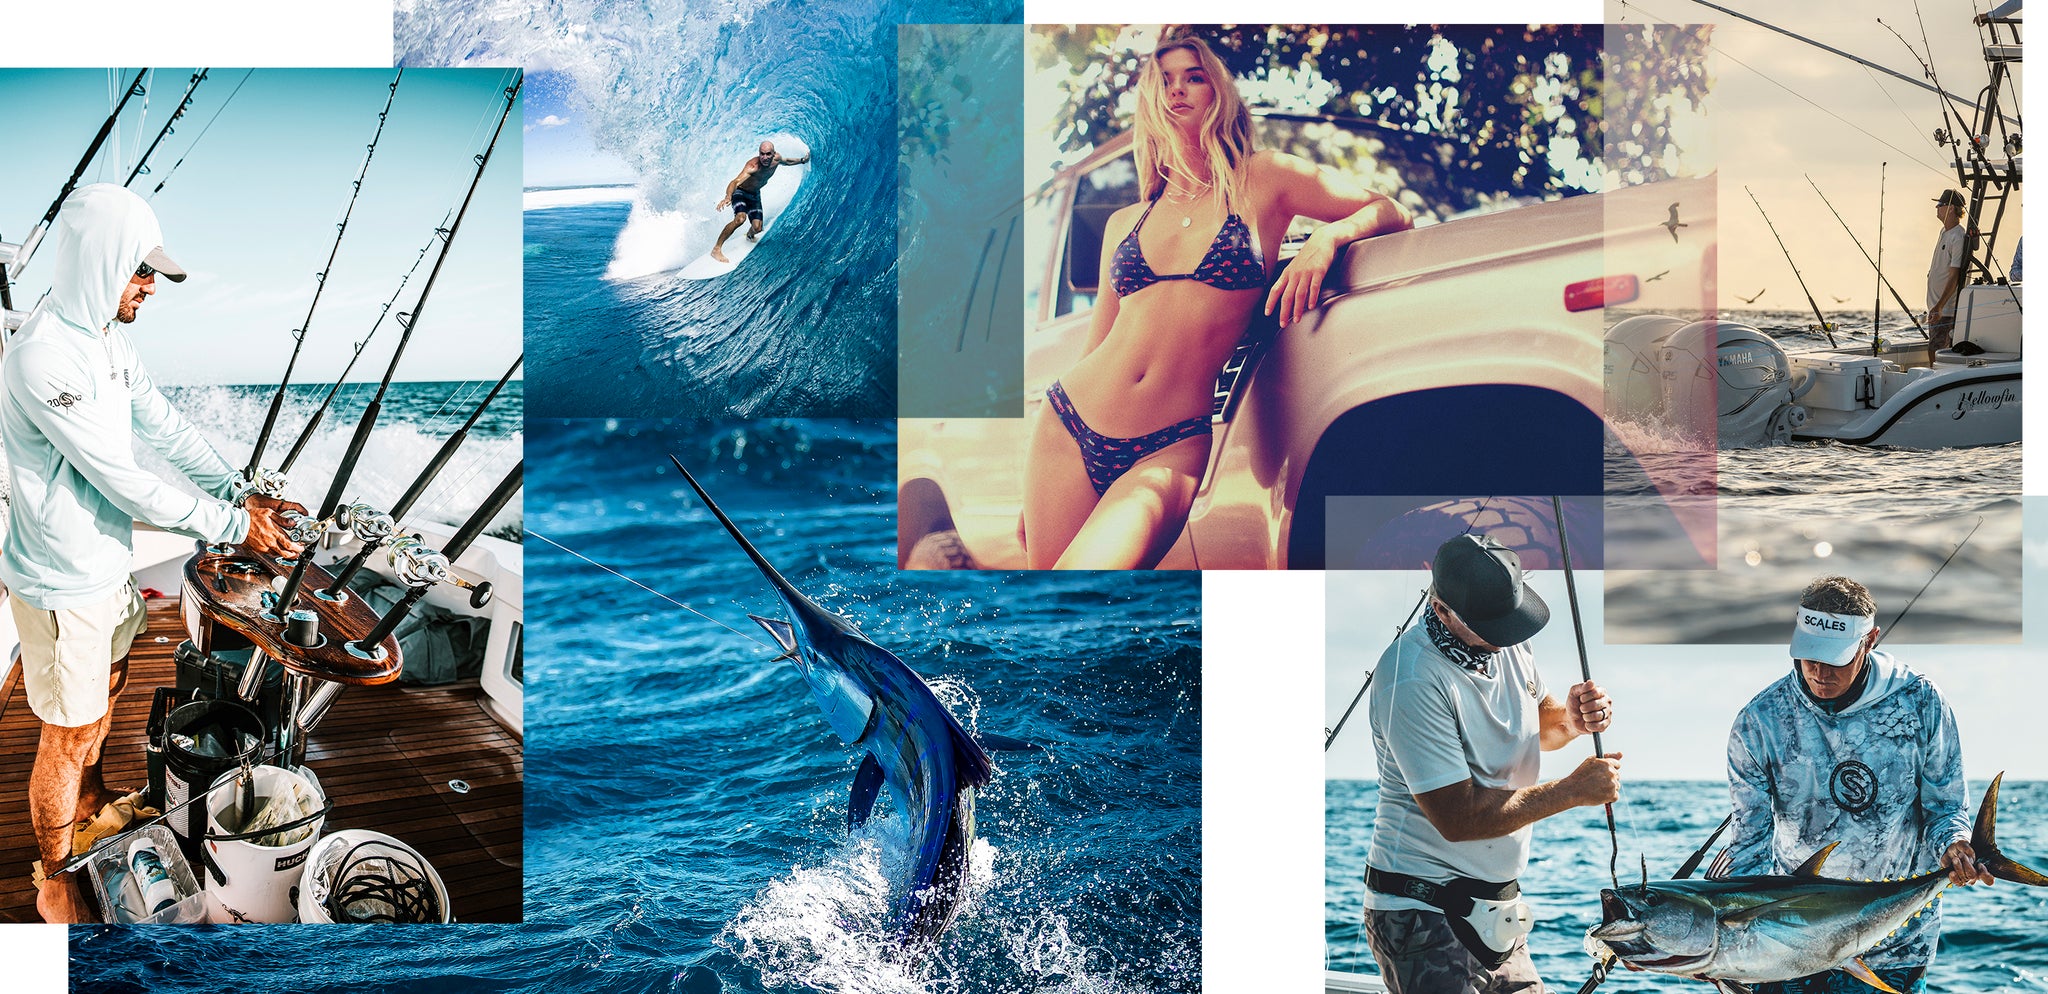 Scales Gear - Ocean-Inspired Performance Apparel for Every